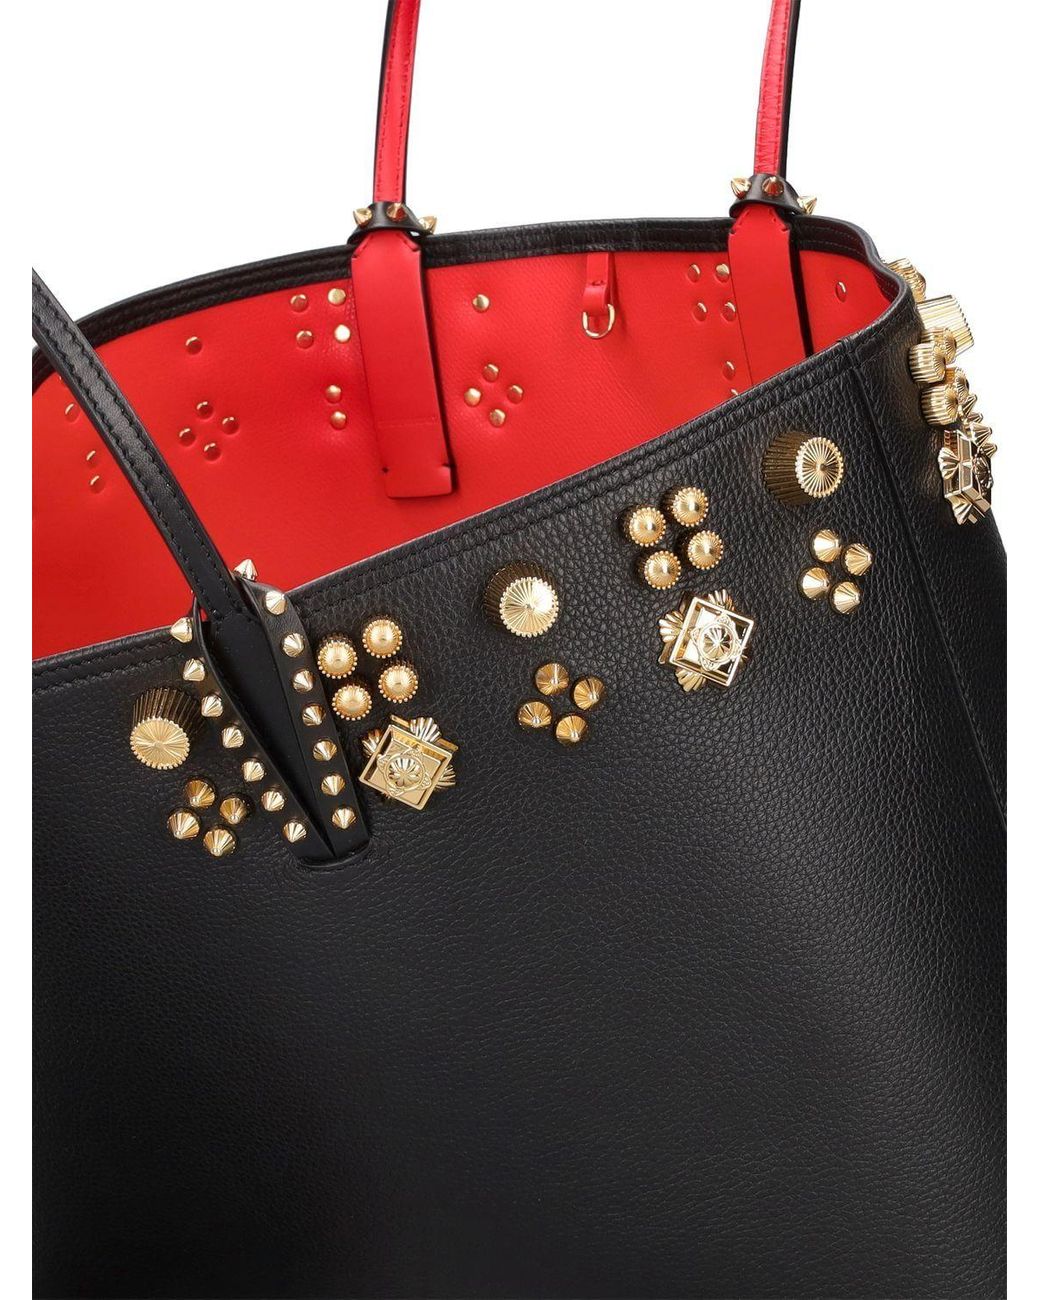 Christian Louboutin Cabata Courones Seville Leather Tote Bag